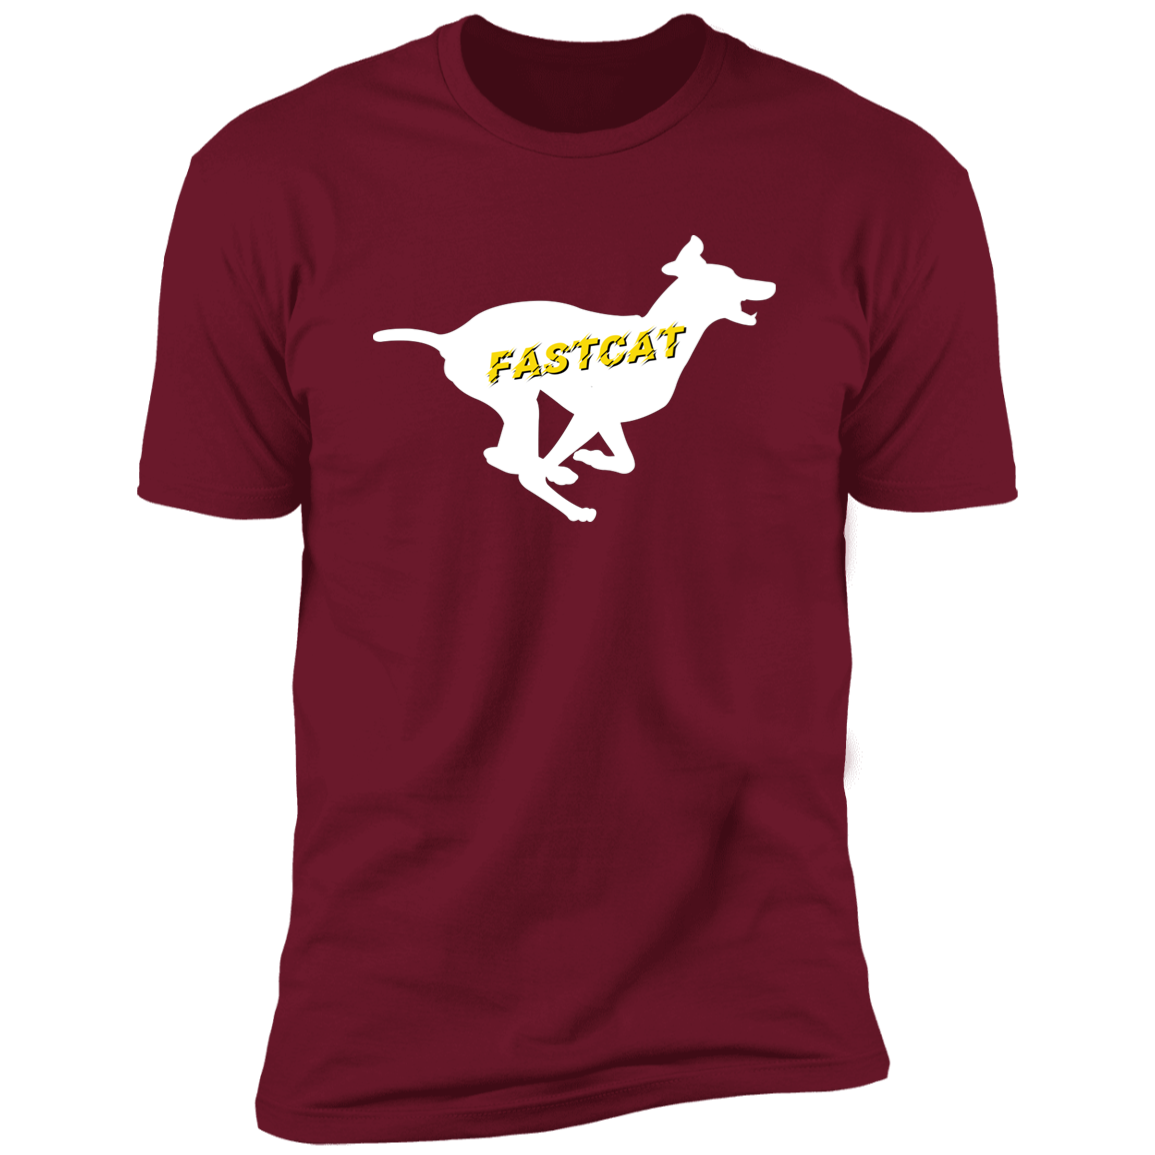 FastCAT Dog T-shirt, sporting dog t-shirt for humans, FastCAT t-shirt, in cardinal red